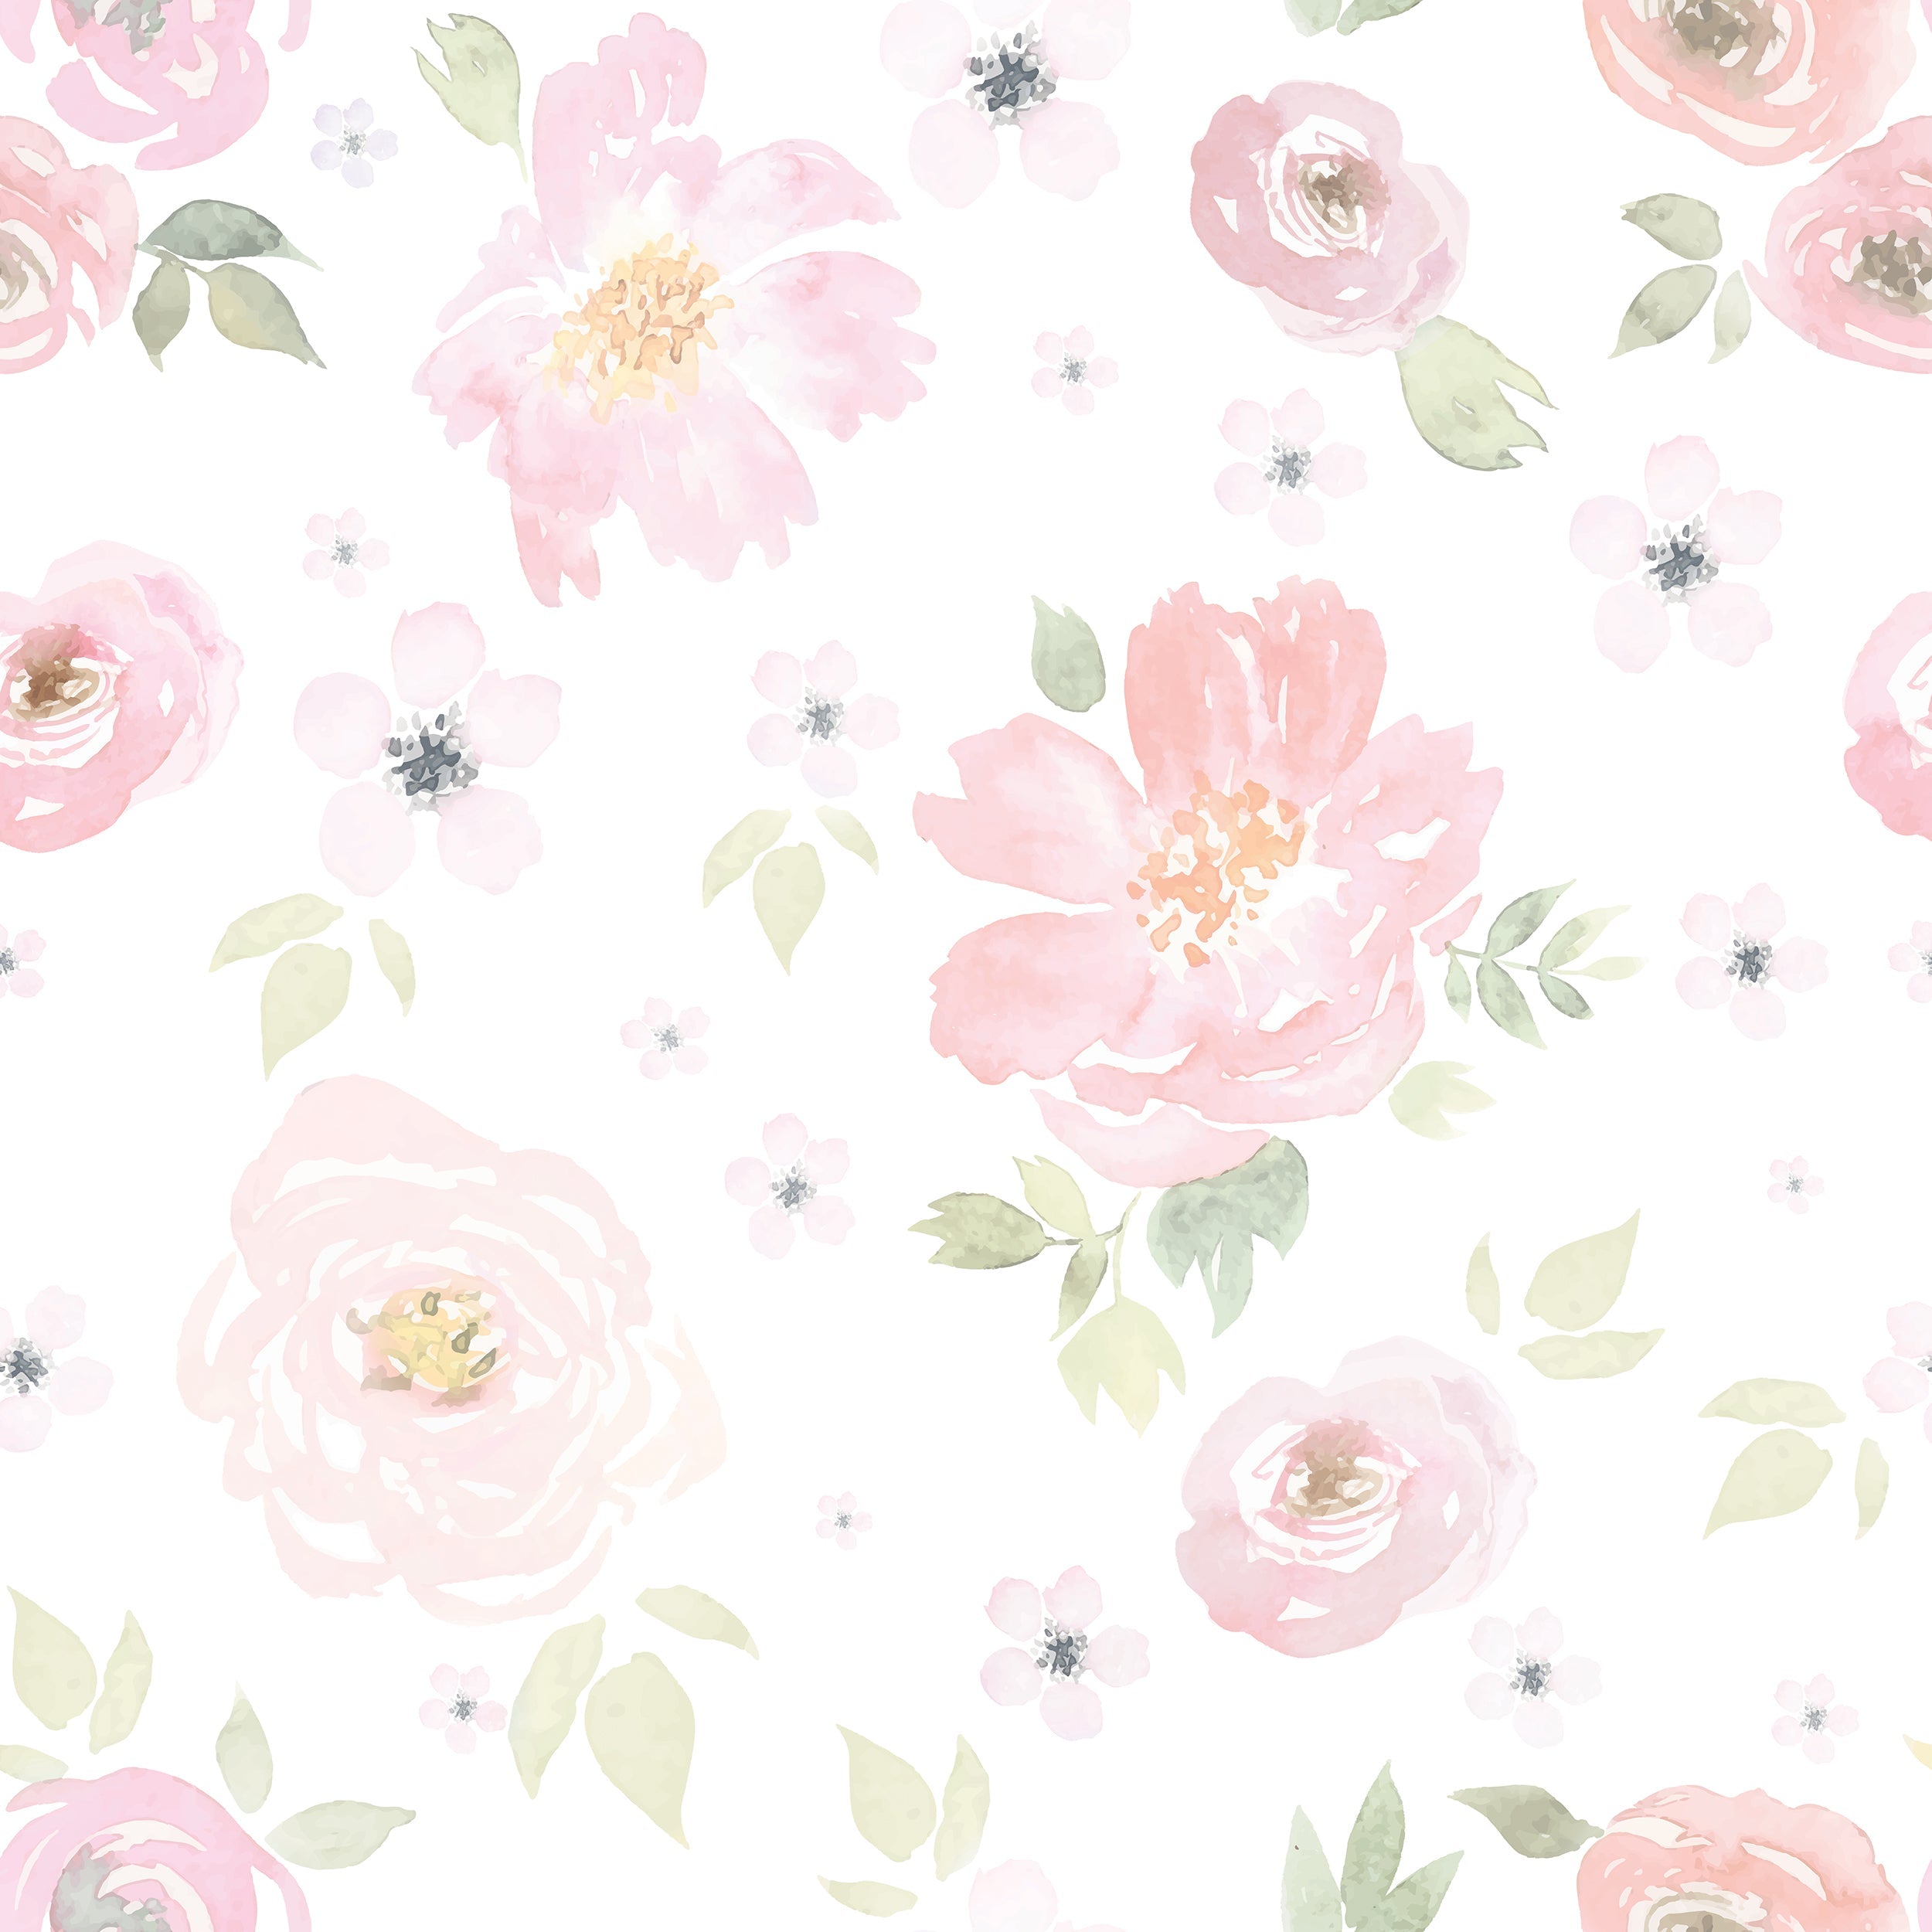 Close-up view of Gentle Blossom Wallpaper - 75", featuring a soft and romantic watercolor pattern of large pink peonies and smaller blossoms with green foliage on a white background. The delicate floral design evokes a sense of calm and beauty, perfect for creating a soothing ambiance in any space